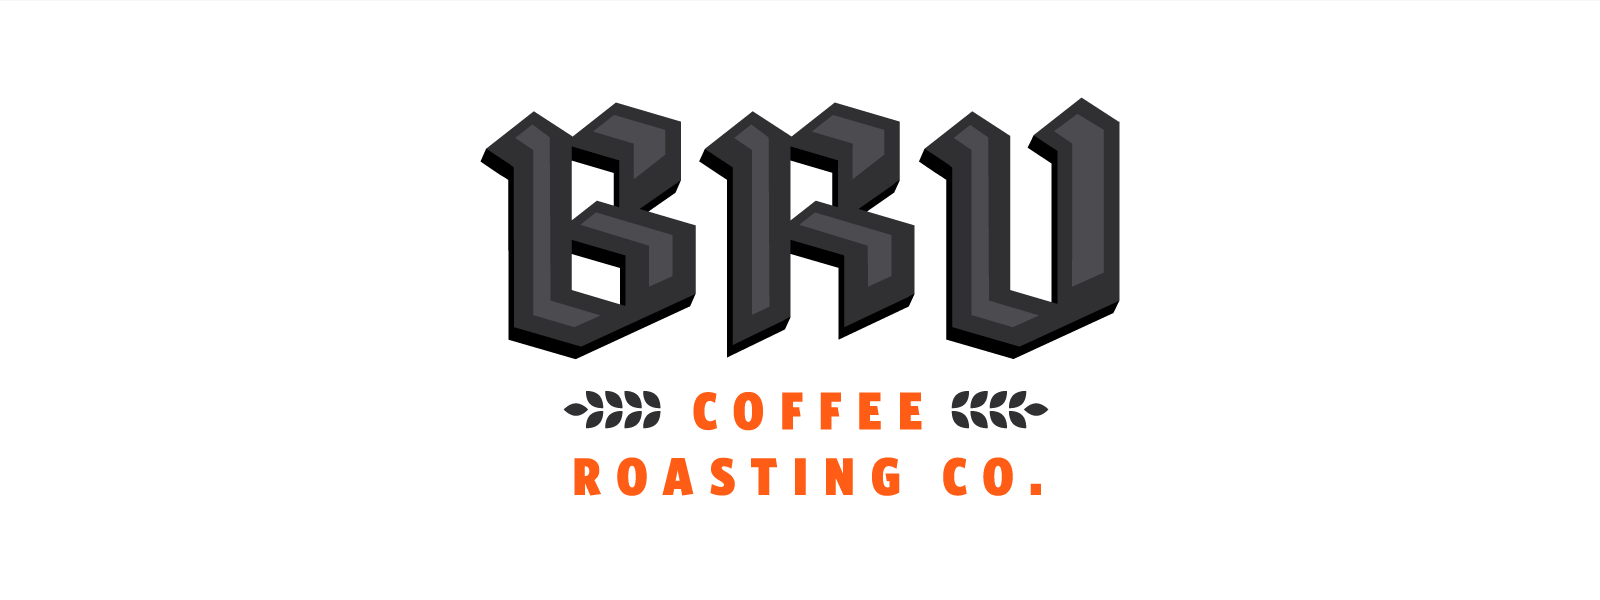 Bru Coffee and Gelato seeks new franchise partners to fulfil national  expansion plan - Tea & Coffee Trade Journal